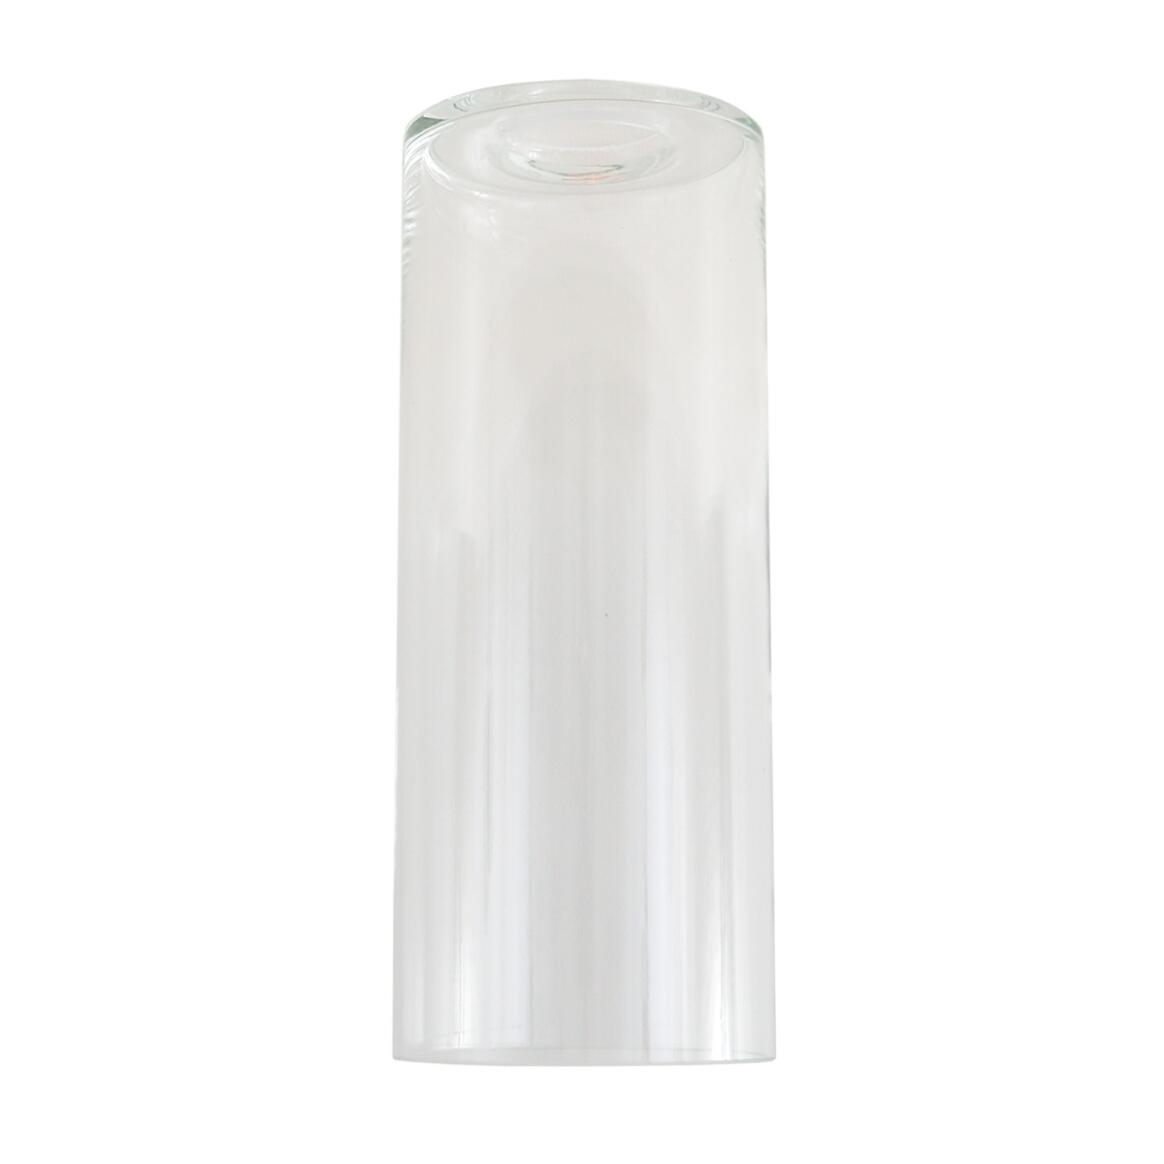 Clear cylinder glass lamp shade main product image